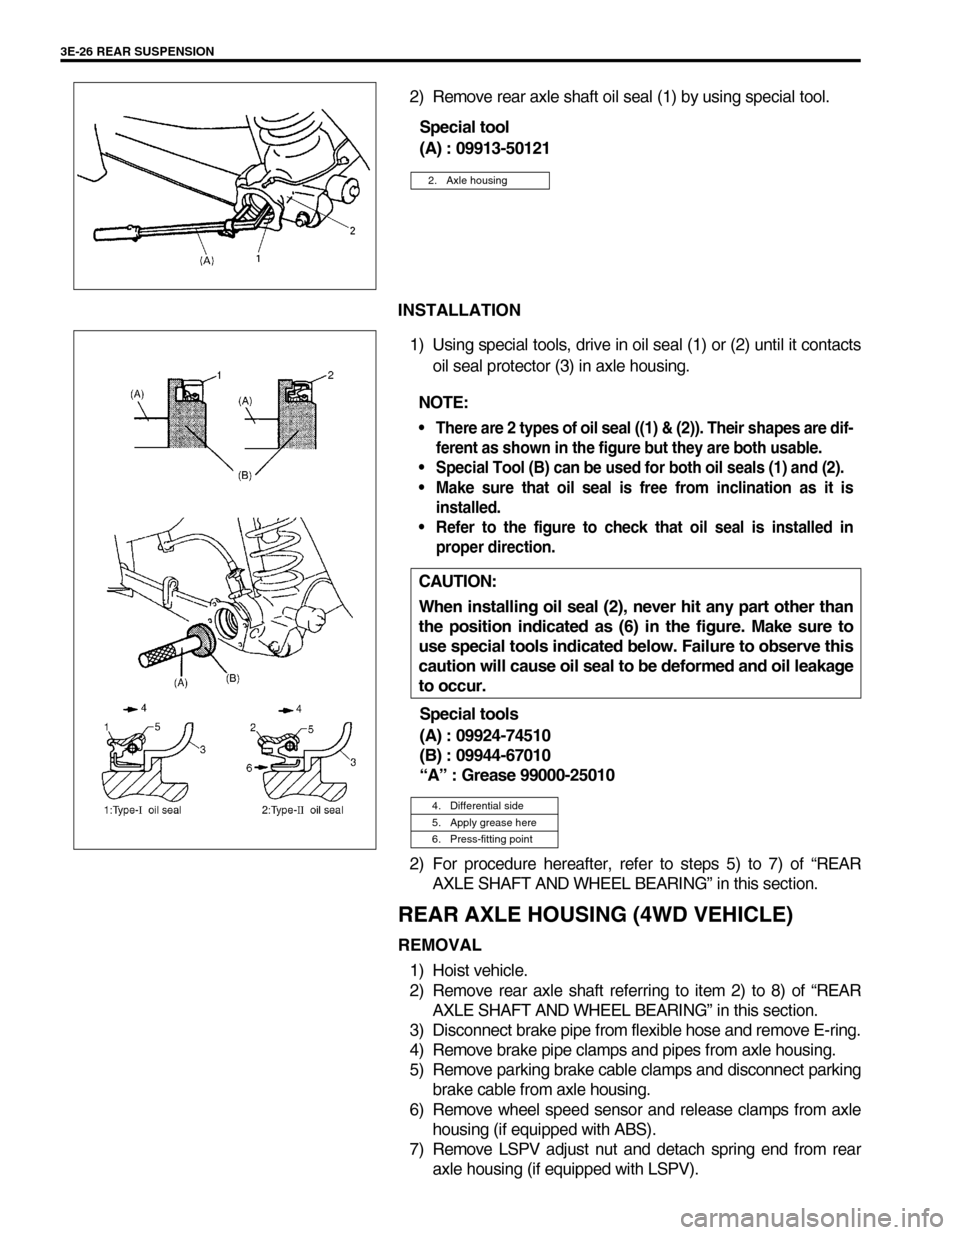 SUZUKI SWIFT 2000 1.G RG413 Service Owners Manual 3E-26 REAR SUSPENSION
2) Remove rear axle shaft oil seal (1) by using special tool.
Special tool
(A) : 09913-50121
INSTALLATION
1) Using special tools, drive in oil seal (1) or (2) until it contacts
o